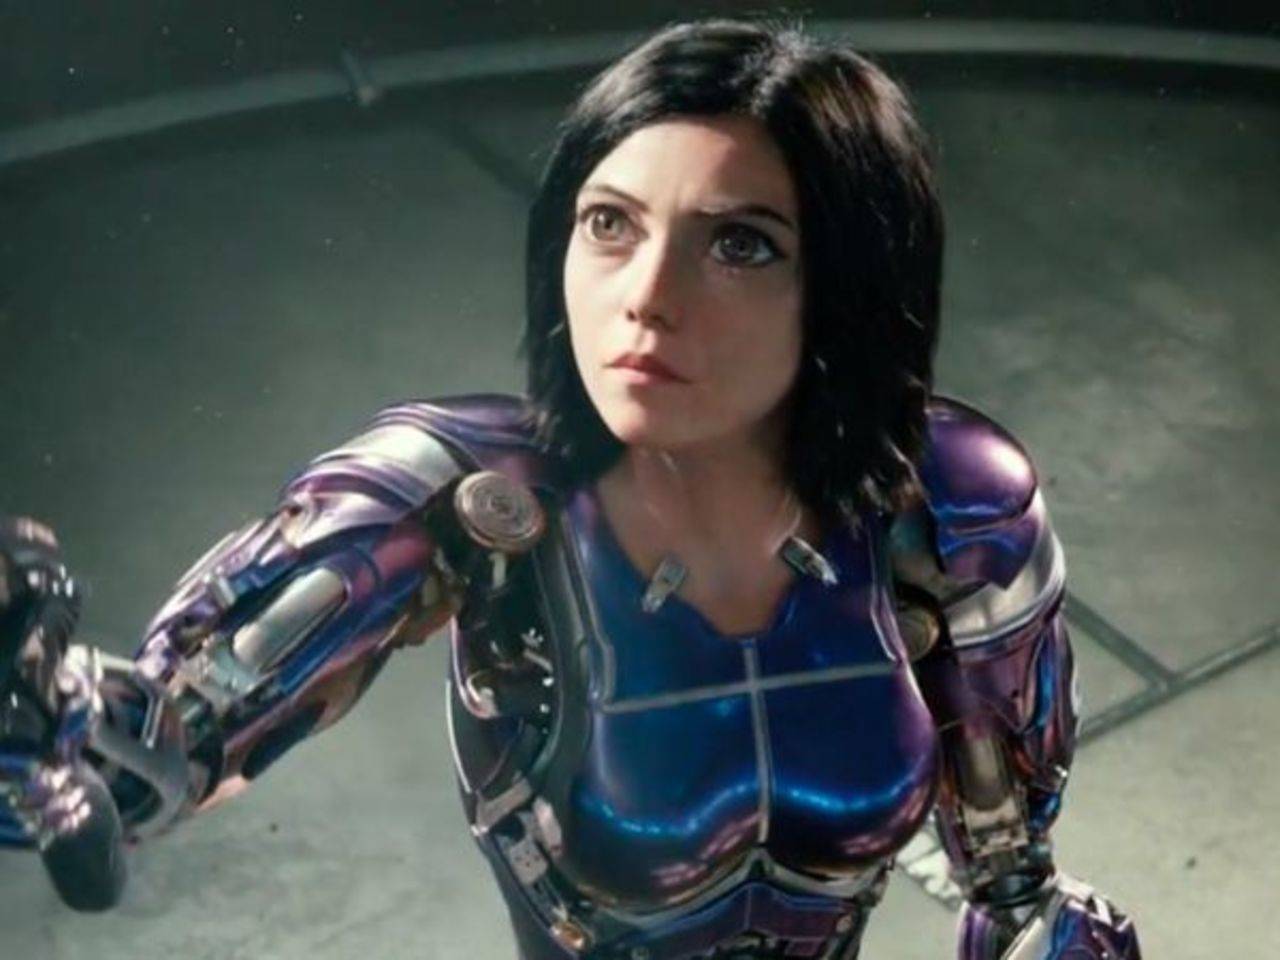 Review Roundup for Alita: Battle Angel